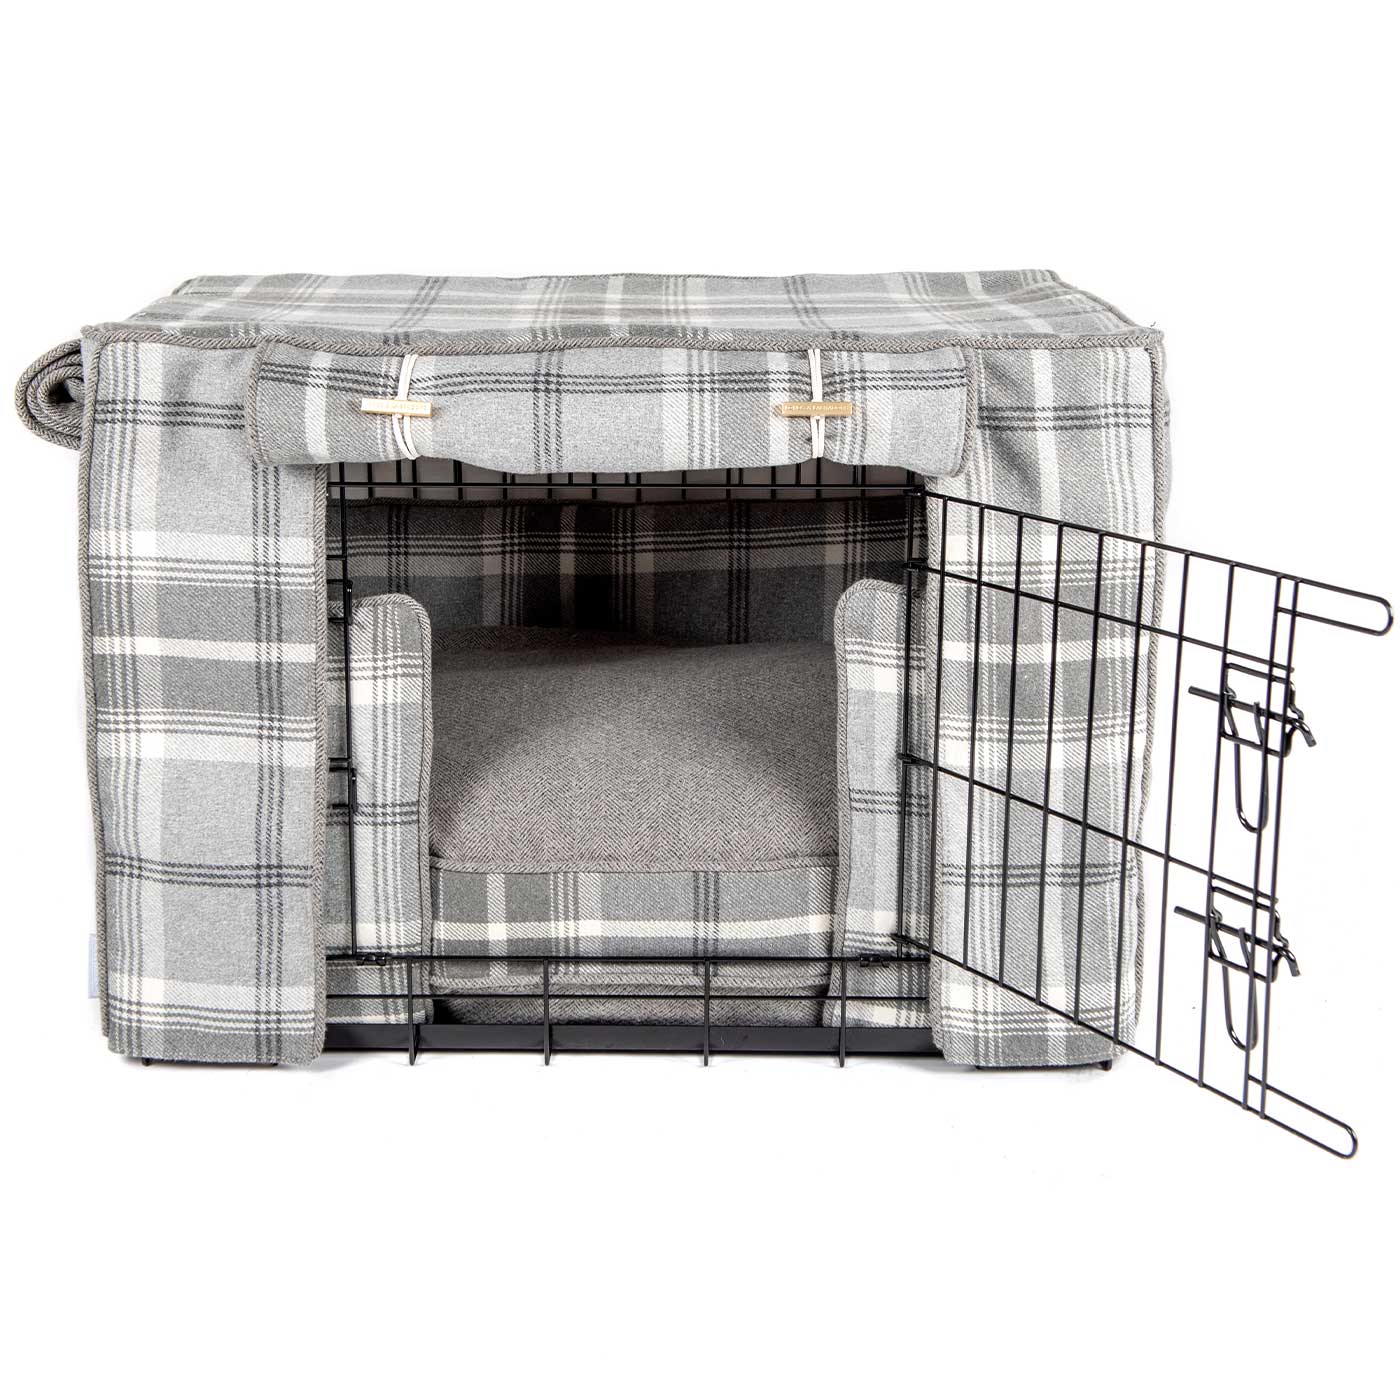 Luxury Heavy Duty Dog Crate, In Stunning Balmoral Dove Grey Tweed Crate Set, The Perfect Dog Crate Set For Building The Ultimate Pet Den! Dog Crate Cover Available To Personalise at Lords & Labradors 